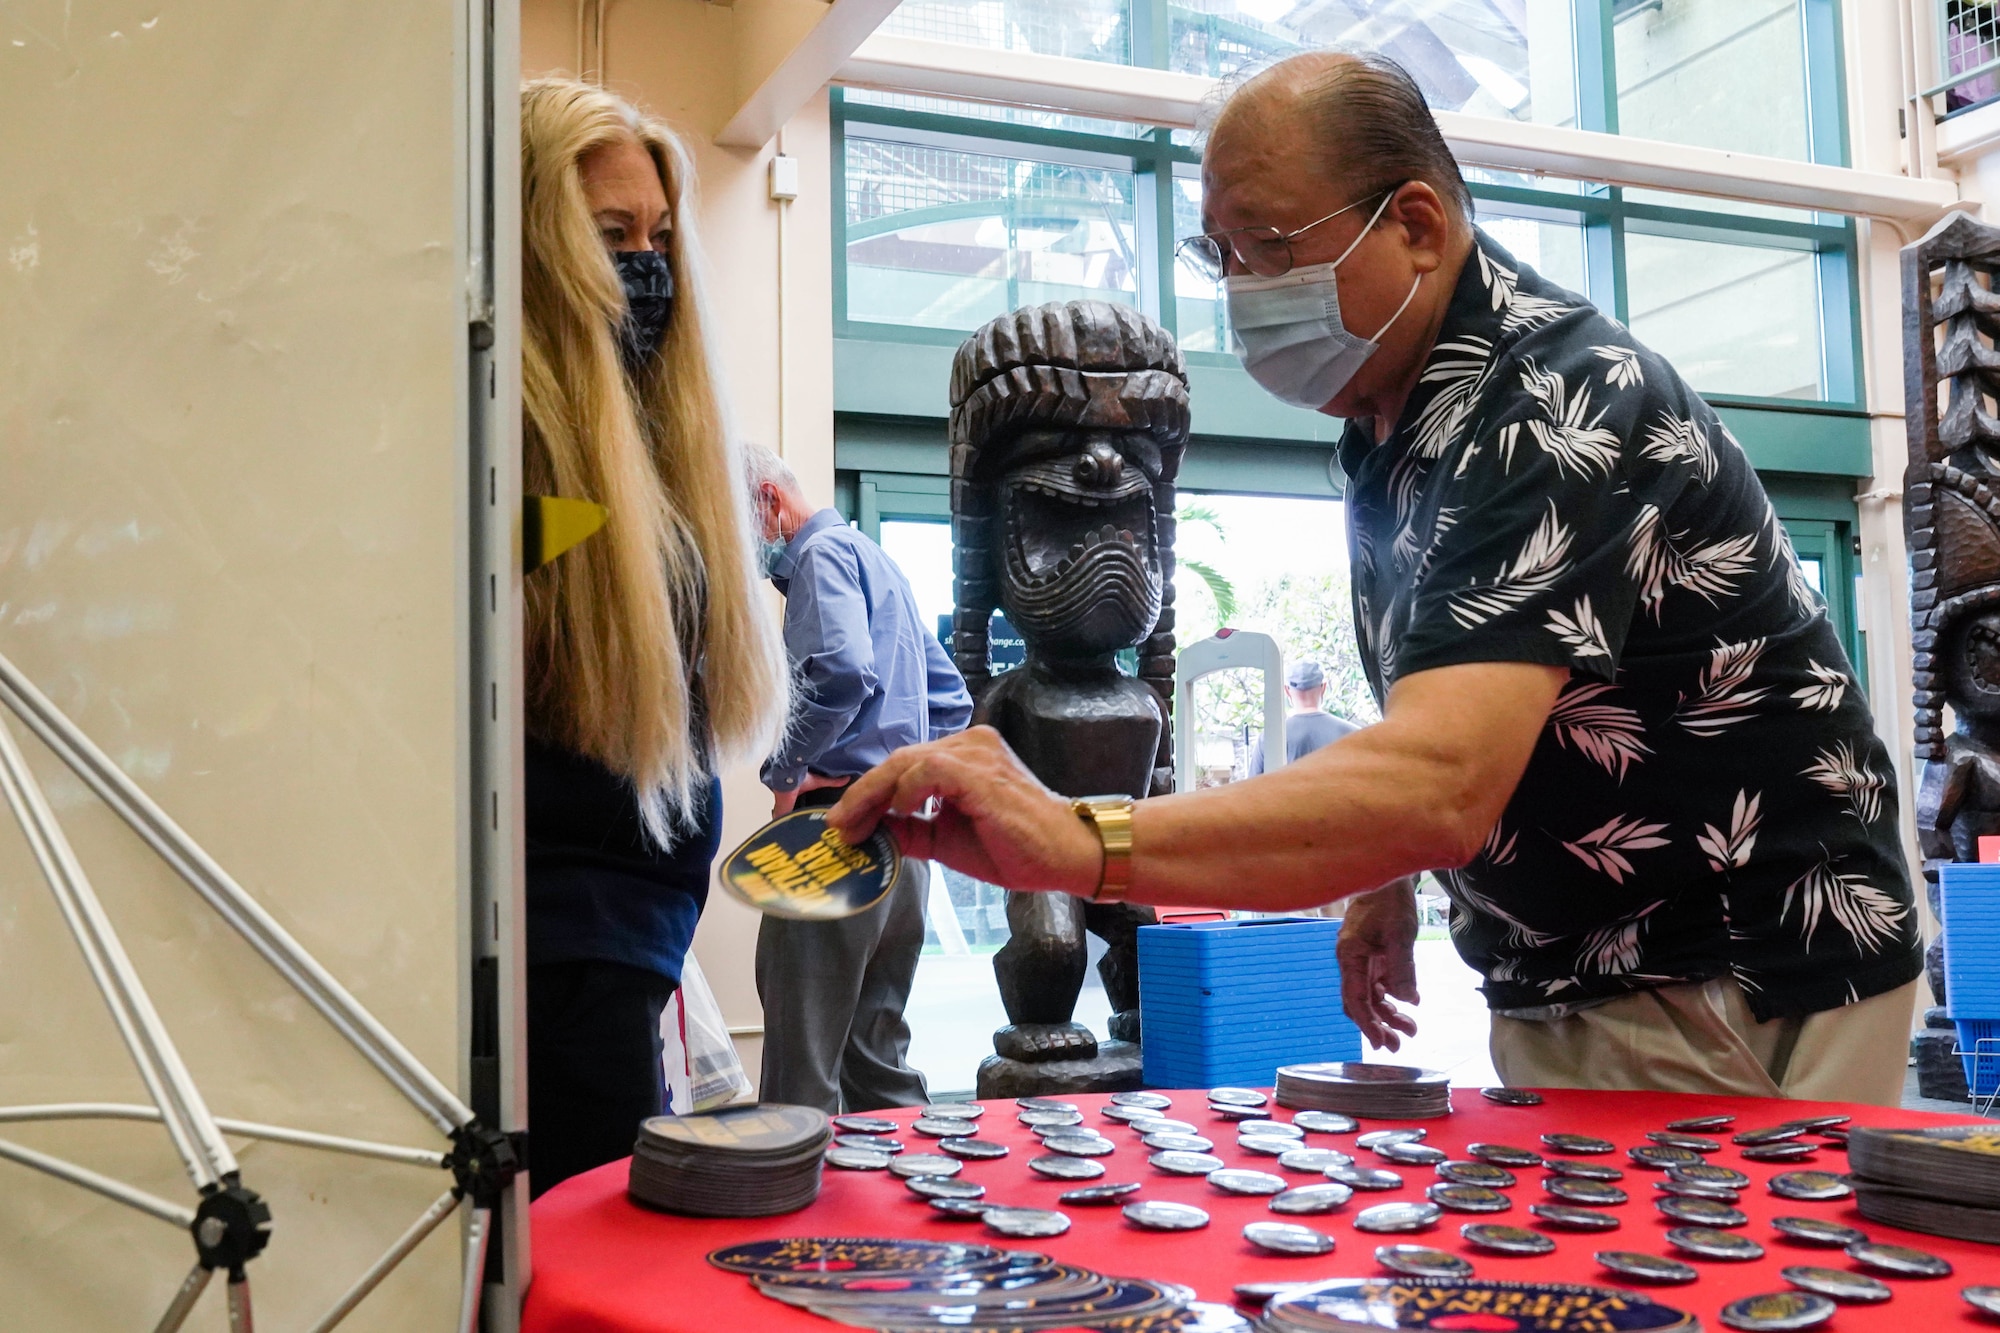 Yvonne Palmieri, Hickam Base Exchange store manager, assists Kenji Tanaka, retired U.S. Army veteran, during a pinning ceremony in honor of Vietnam War Veterans Day at Joint Base Pearl Harbor-Hickam, Hawaii, March 29, 2021. In 2017, President Donald Trump declared National Vietnam War Veterans Day because on this day in 1973 U.S. combat troops departed the Republic of Vietnam. (U.S. Air Force photo by Airman 1st Class Makensie Cooper)